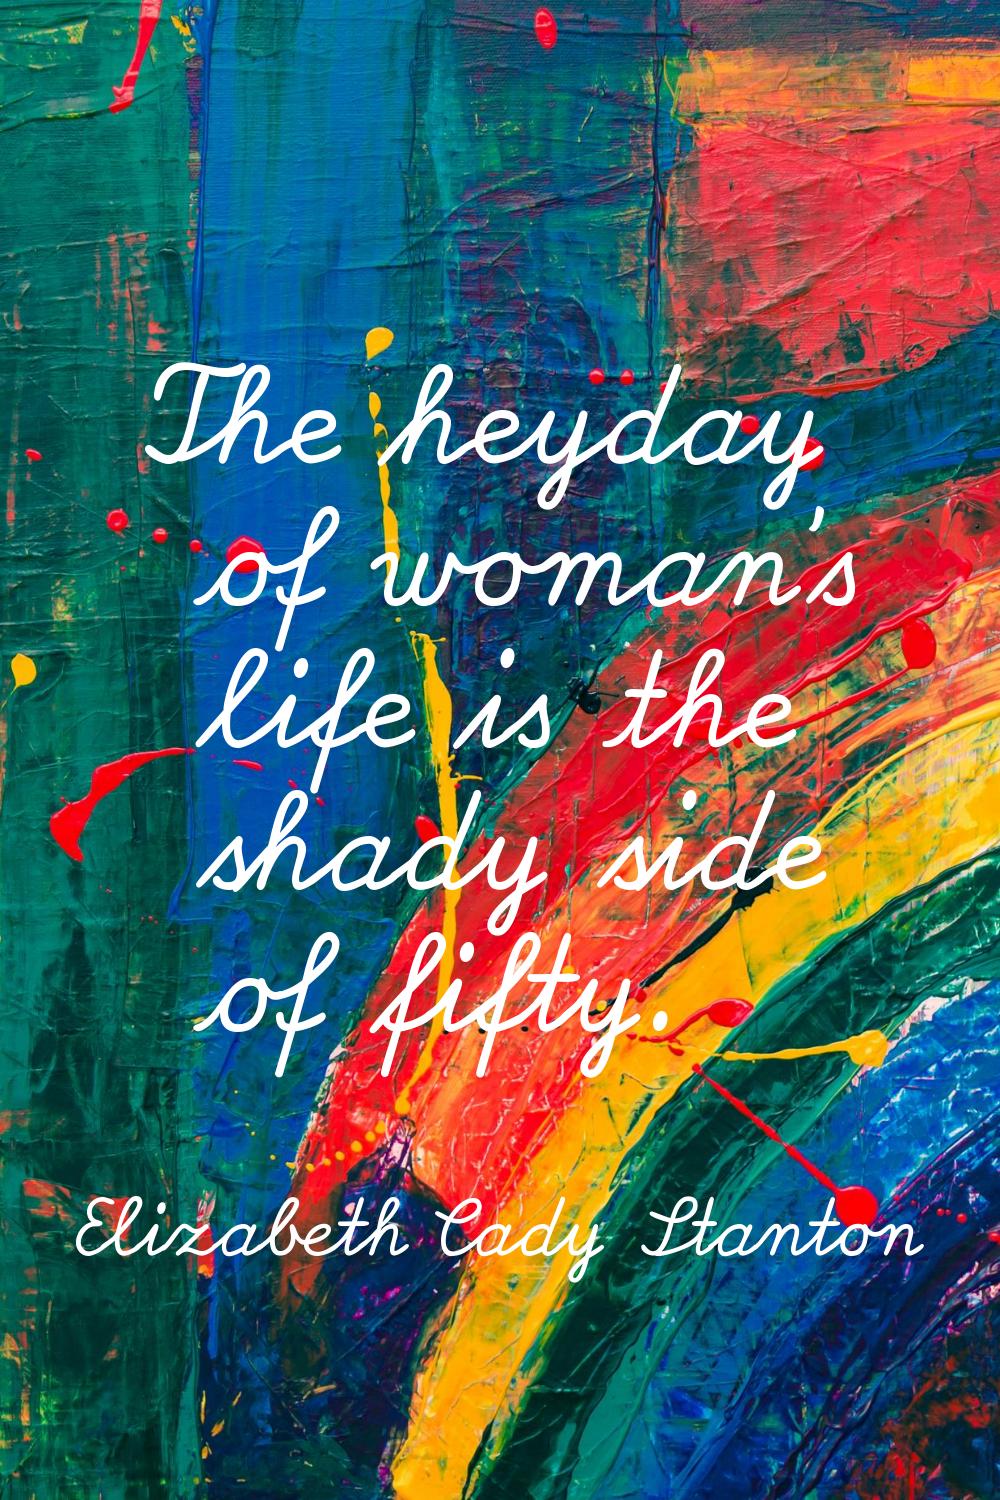 The heyday of woman's life is the shady side of fifty.